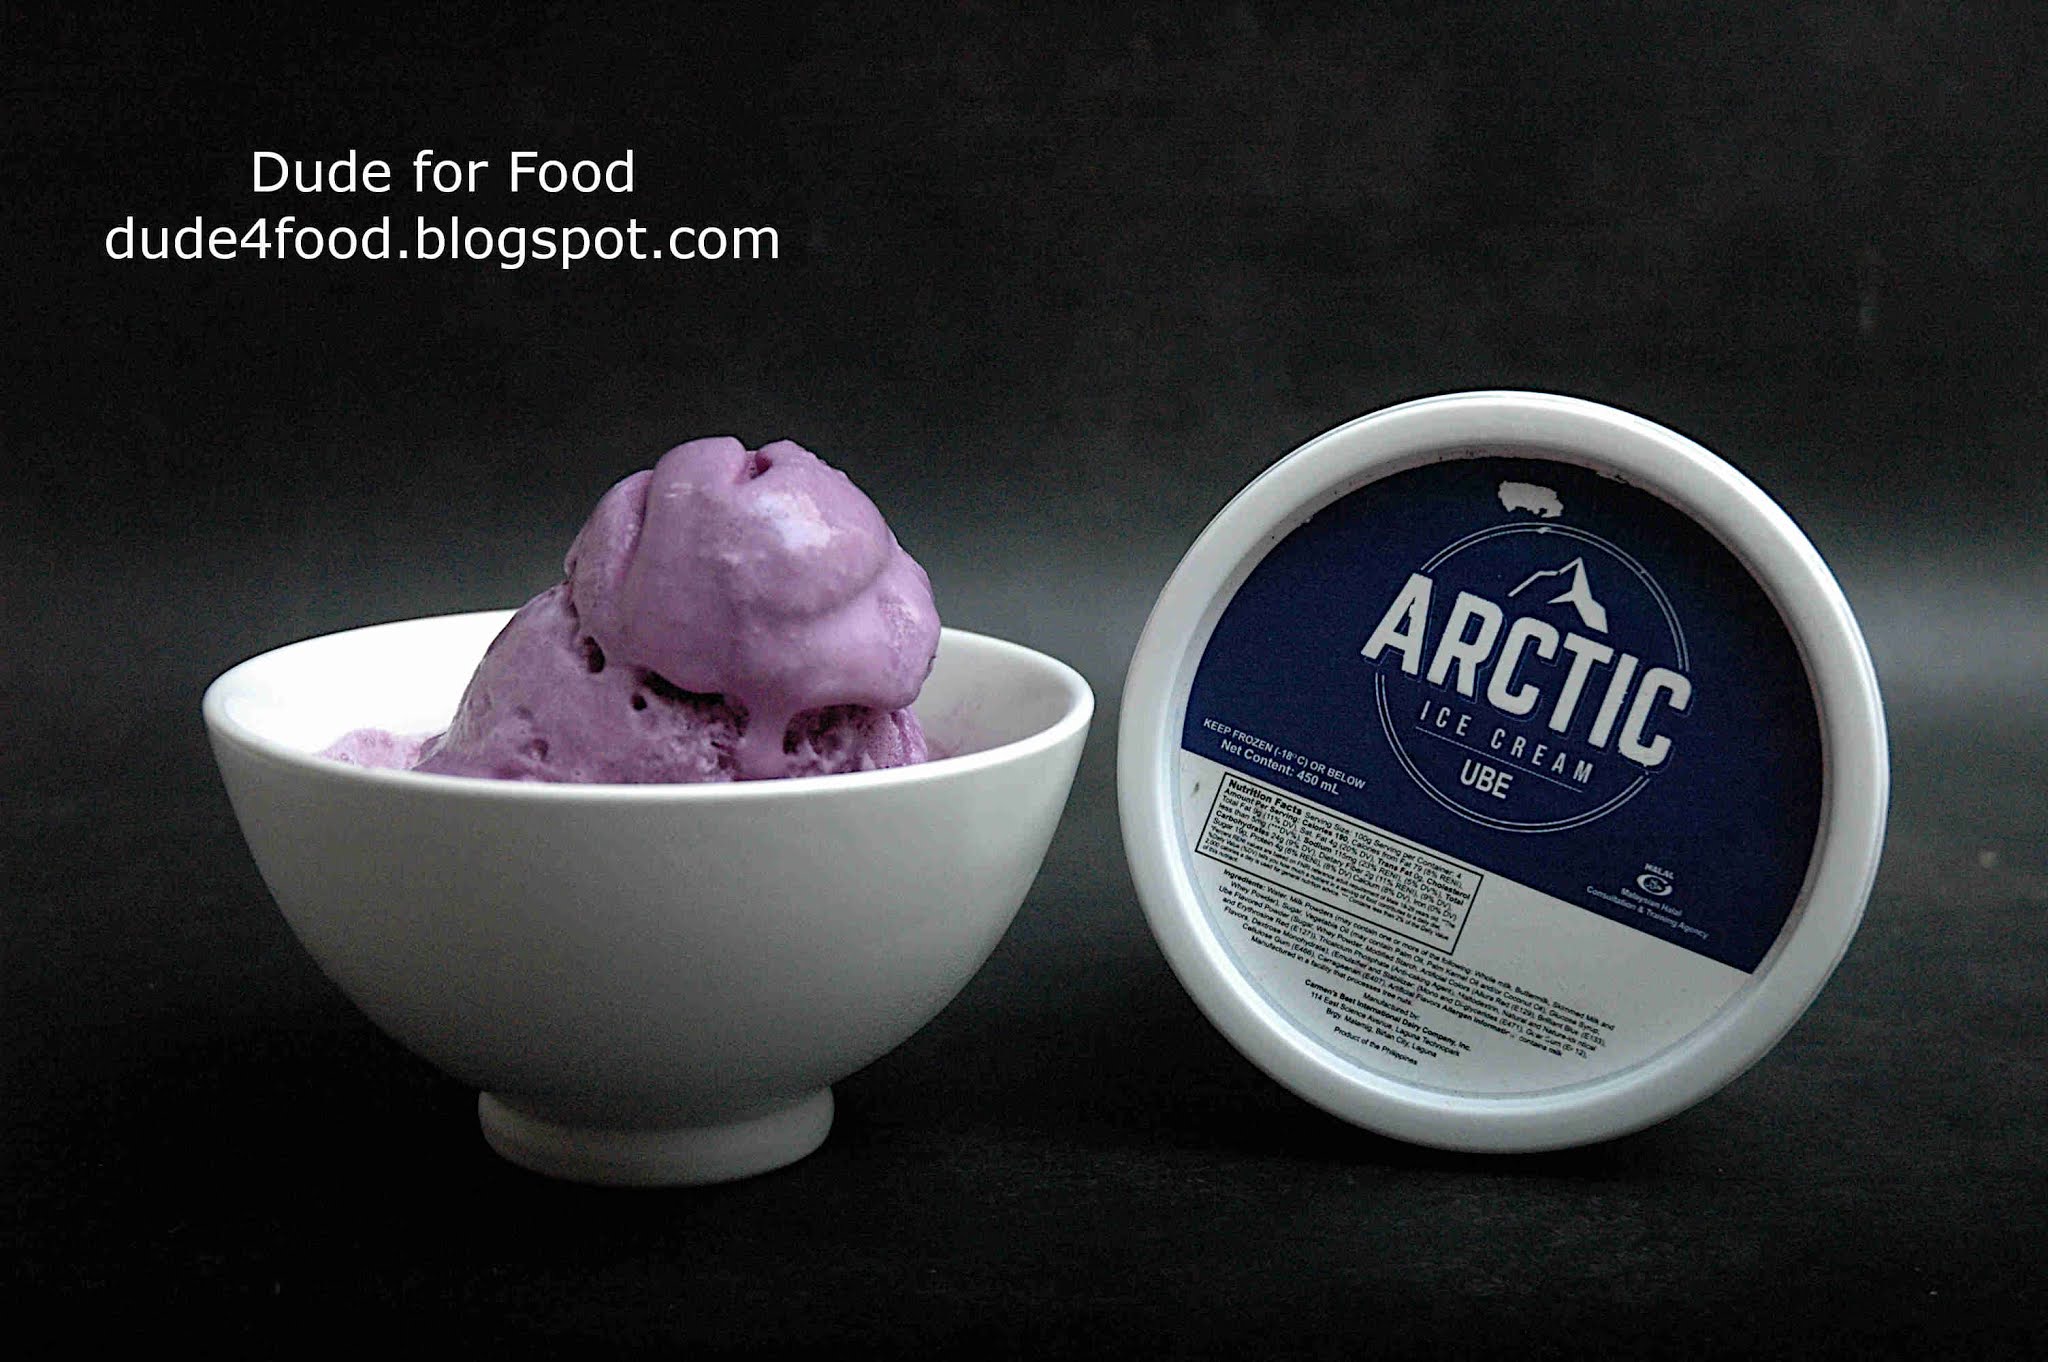 Dude For Food Reinventing The Basics Carmen S Best Brings Quality And Value With Their New Value Line Arctic Ice Cream